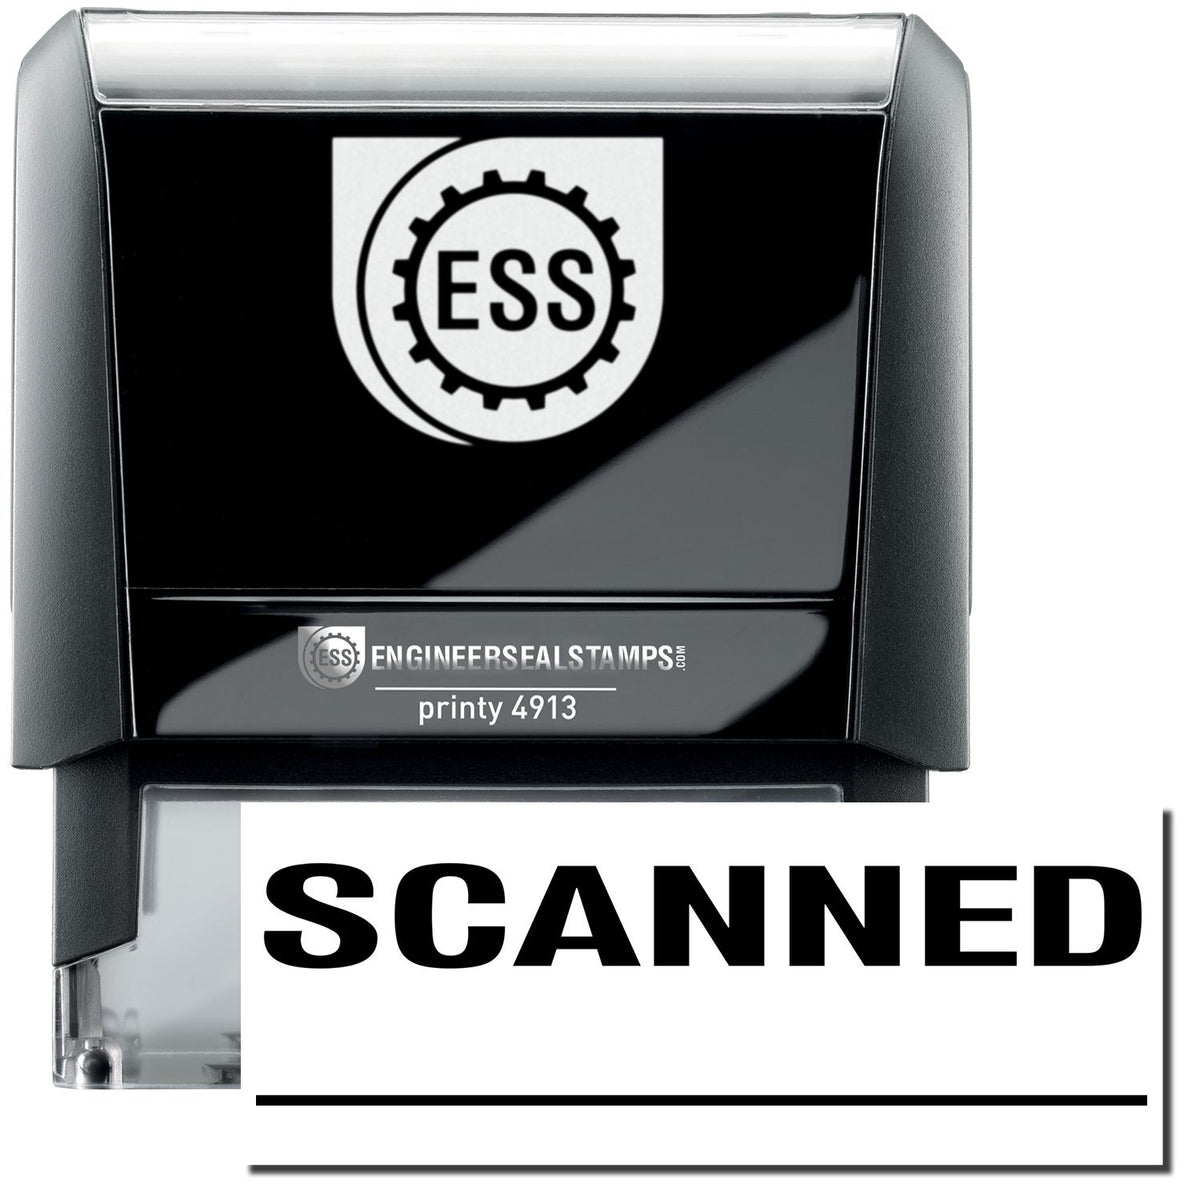 A self-inking stamp with a stamped image showing how the text &quot;SCANNED&quot; in a large font with a line under it is displayed after stamping.